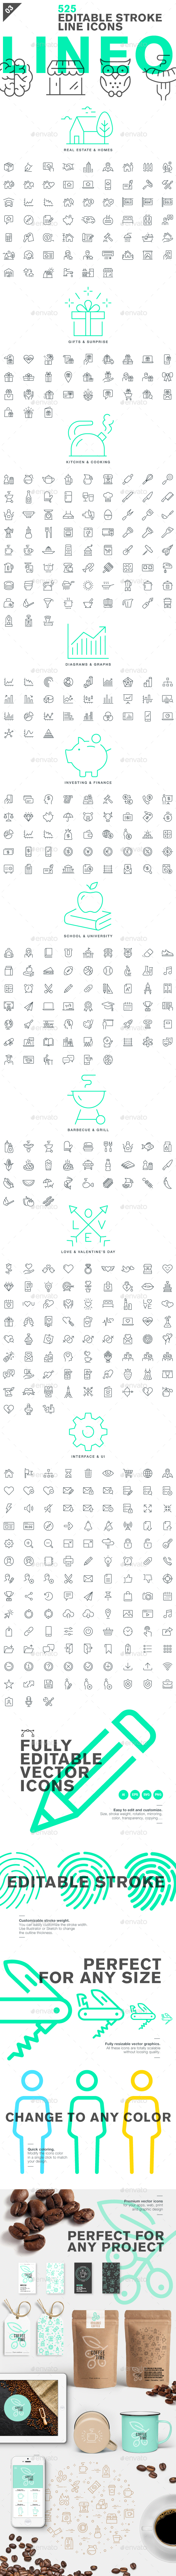 Lineo - Pack 3 - 525 Icons